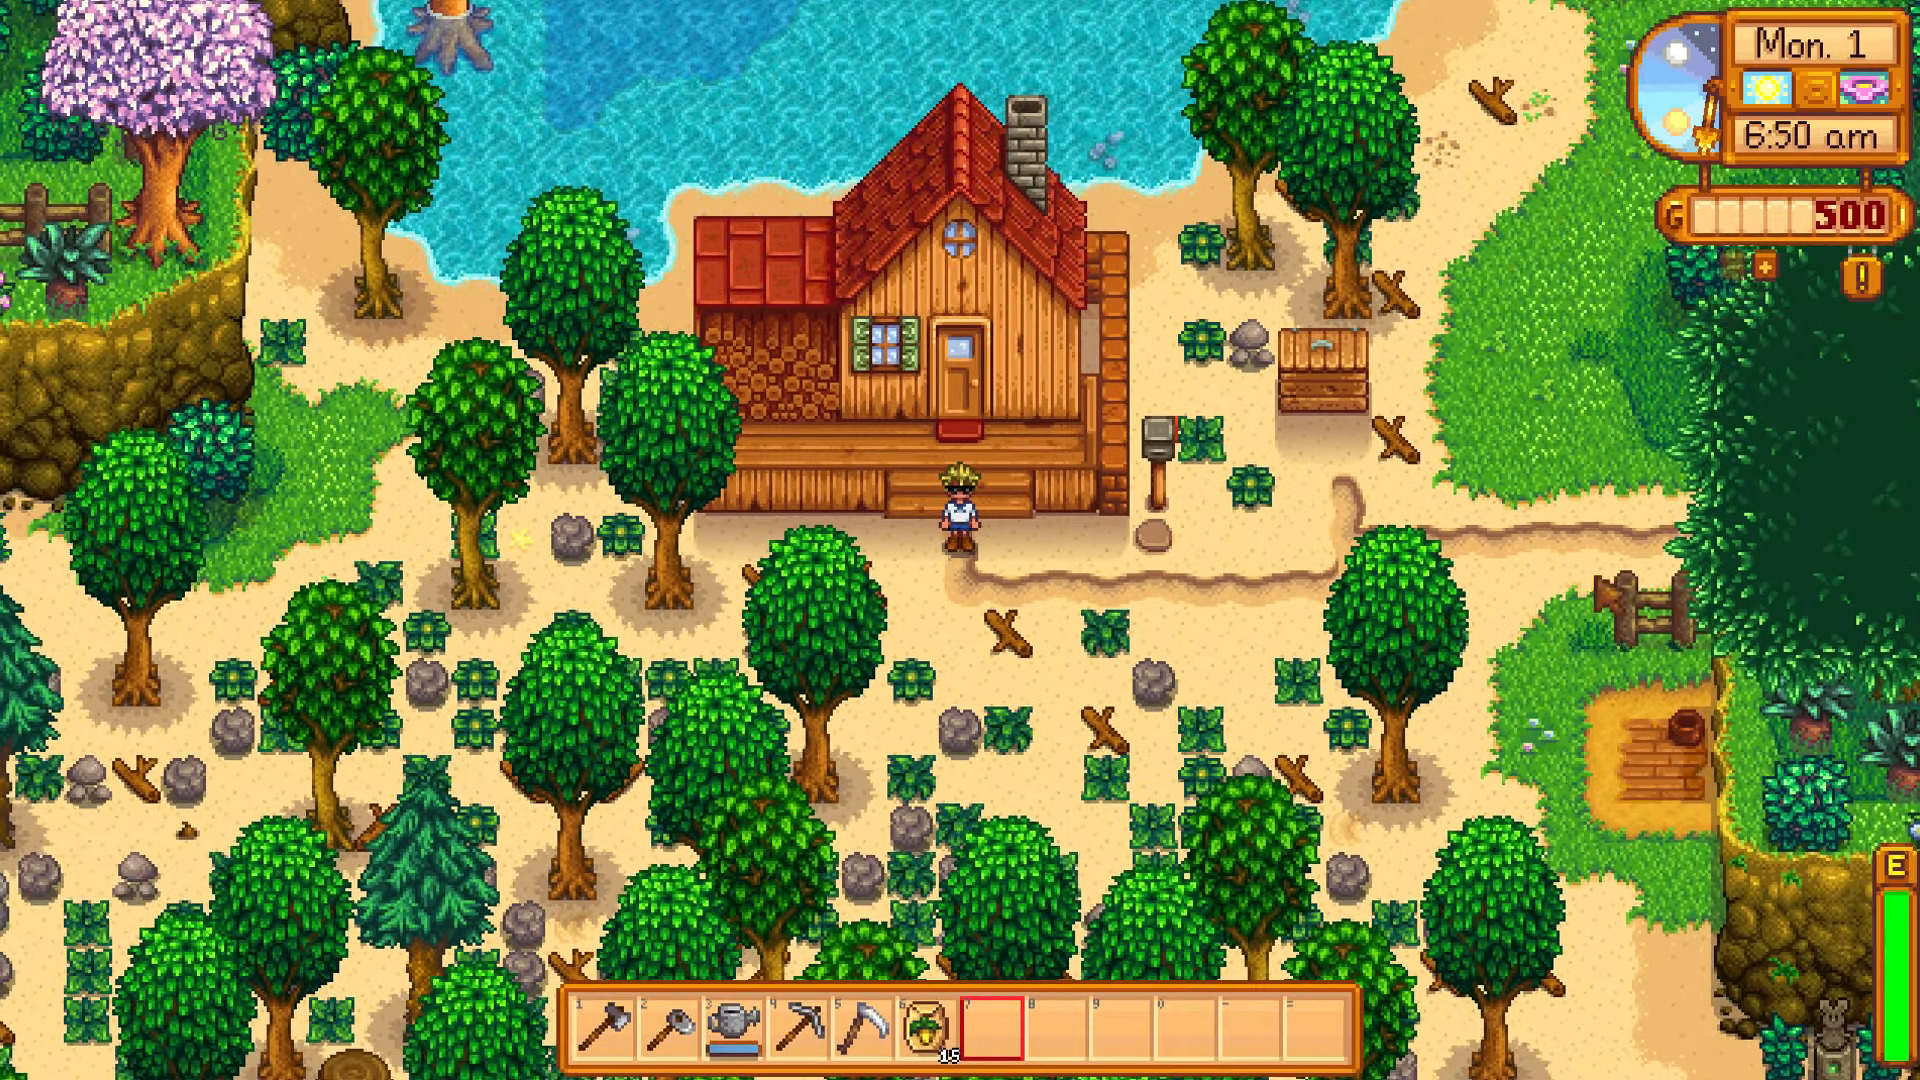 Stardew Valley 1.5 Update Out On PC In Time For The Holidays – Patch Notes And Features